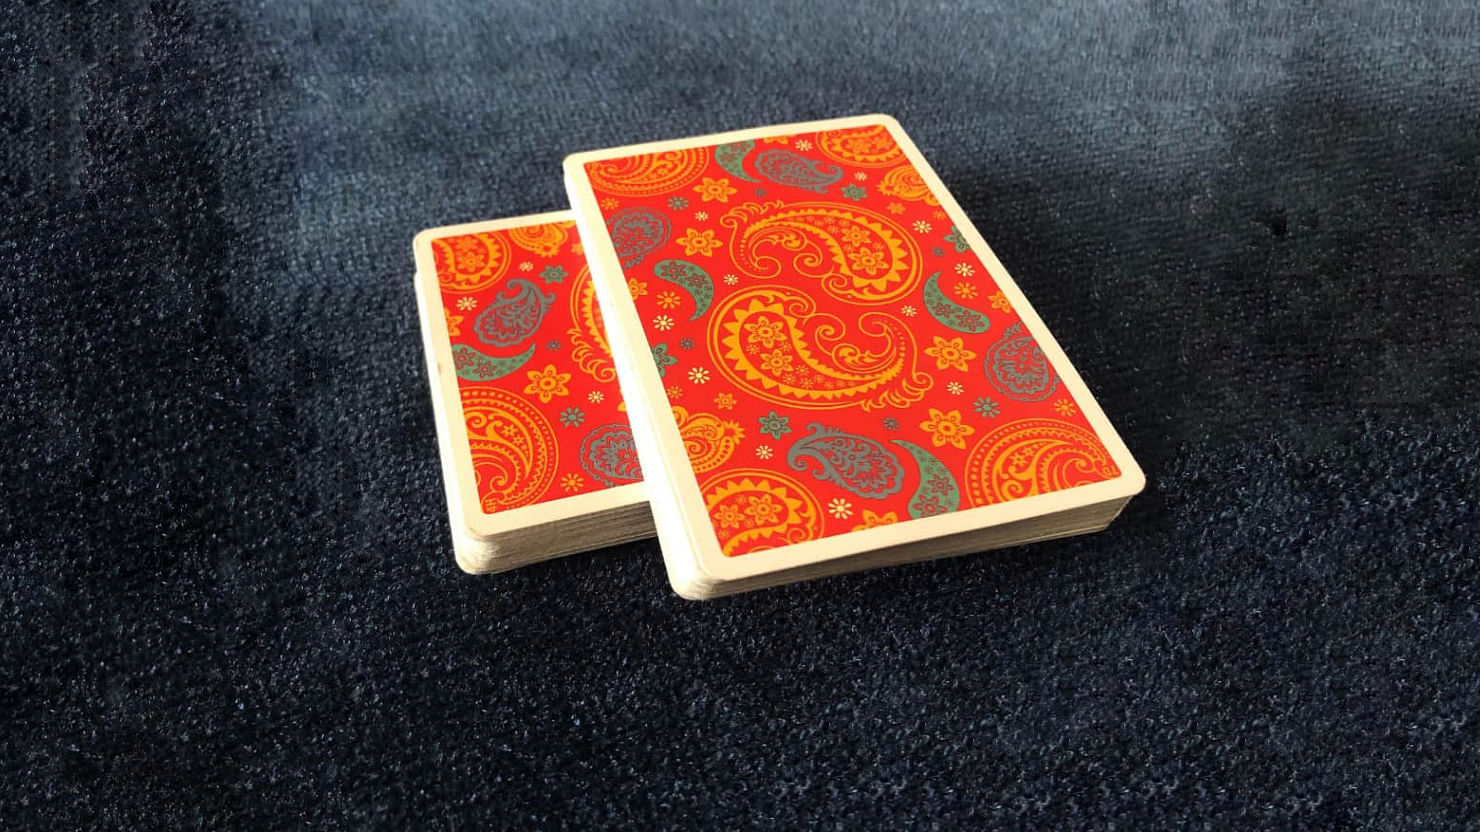 The Dapper Deck Playing Cards from Vanishing Inc. are used to before an easy card trick with the cross cut force